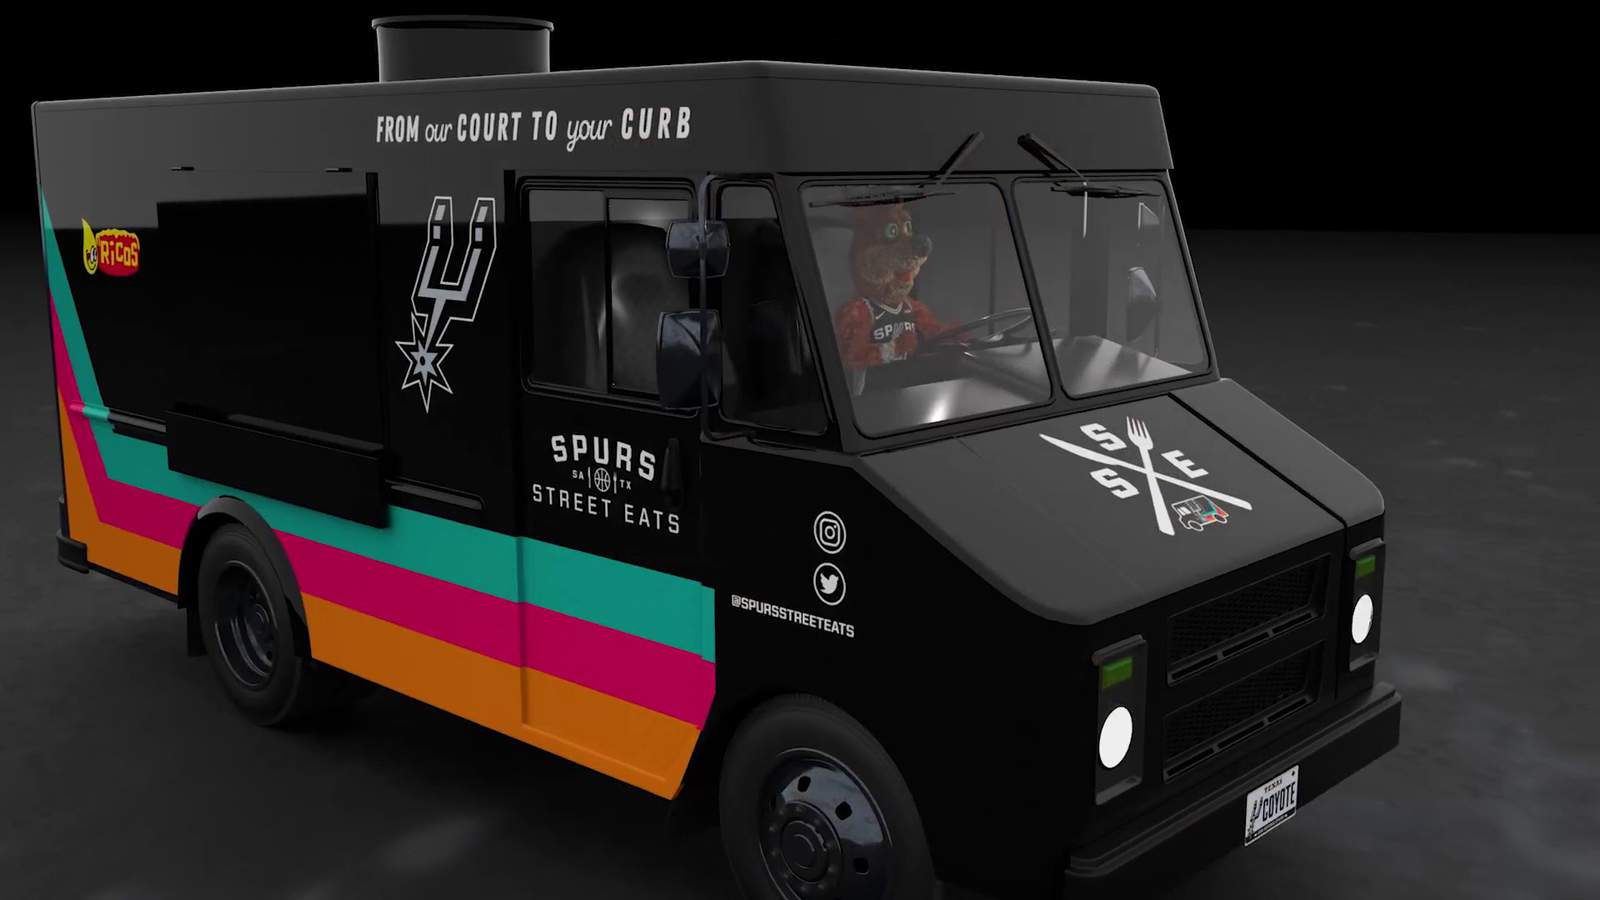 From court to curb: Spurs set to roll out new food truck with San Antonio favorites